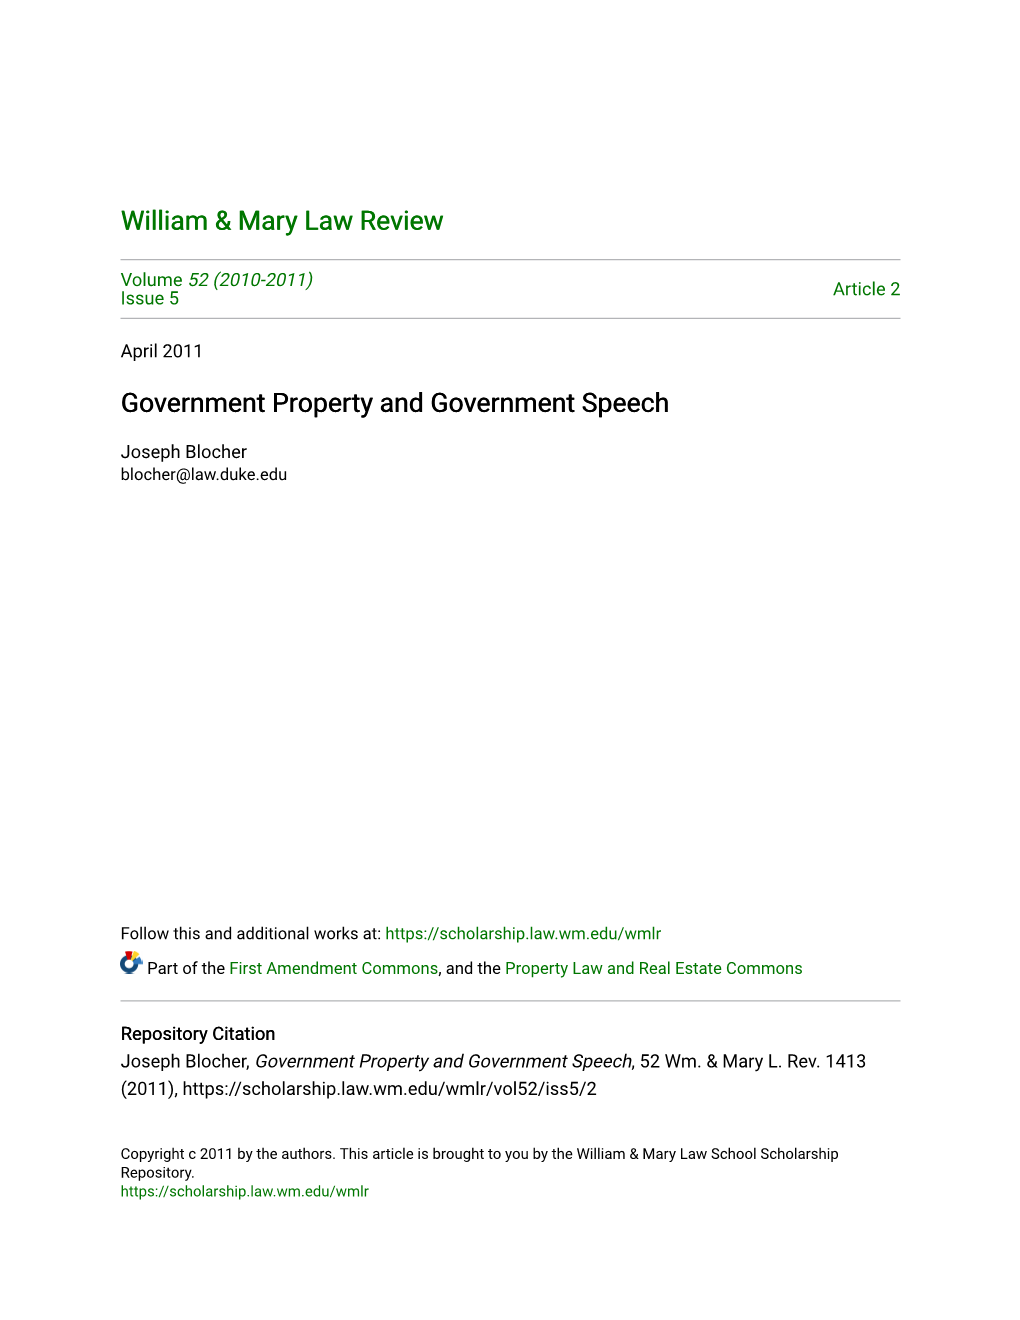 Government Property and Government Speech